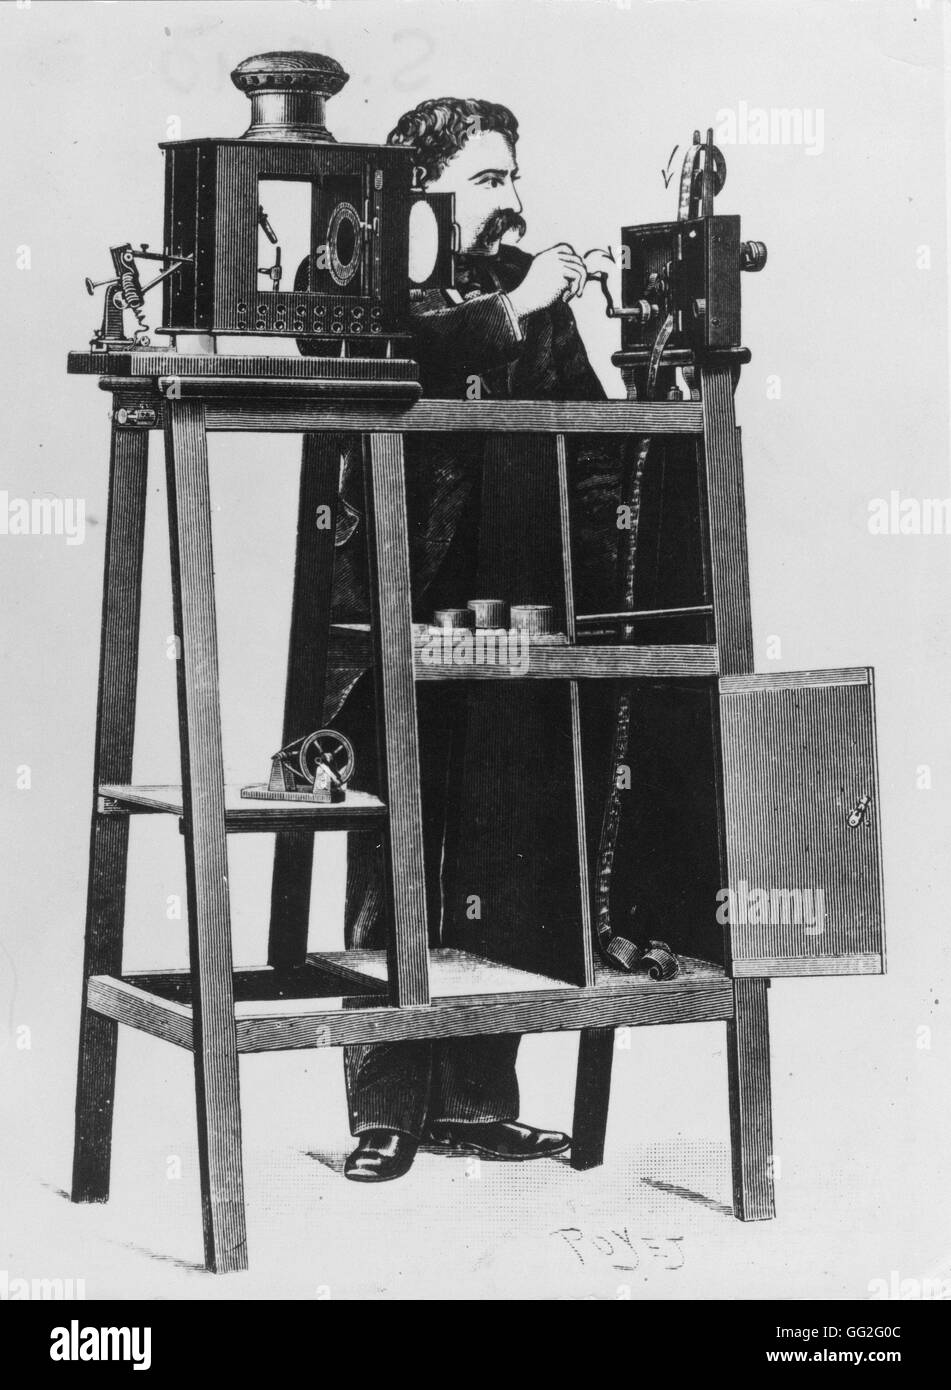 The Cinématographe Lumière, film projector used in England, invented by Louis and Auguste Lumière. 1895 London, Science Museum Stock Photo